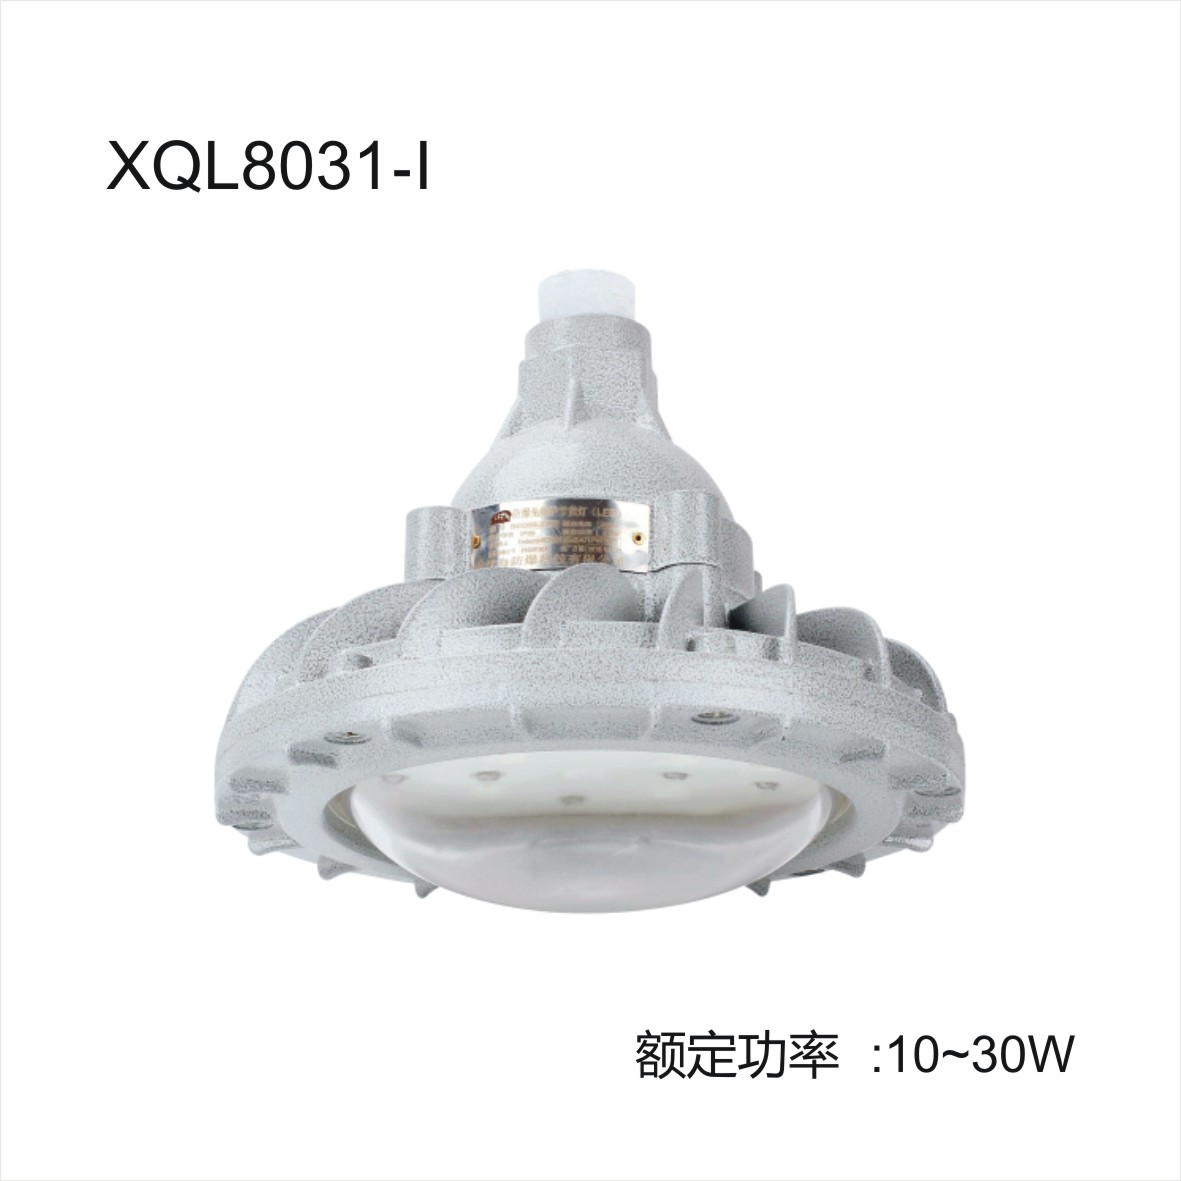 Explosion proof LED lighting used for gas and oil station